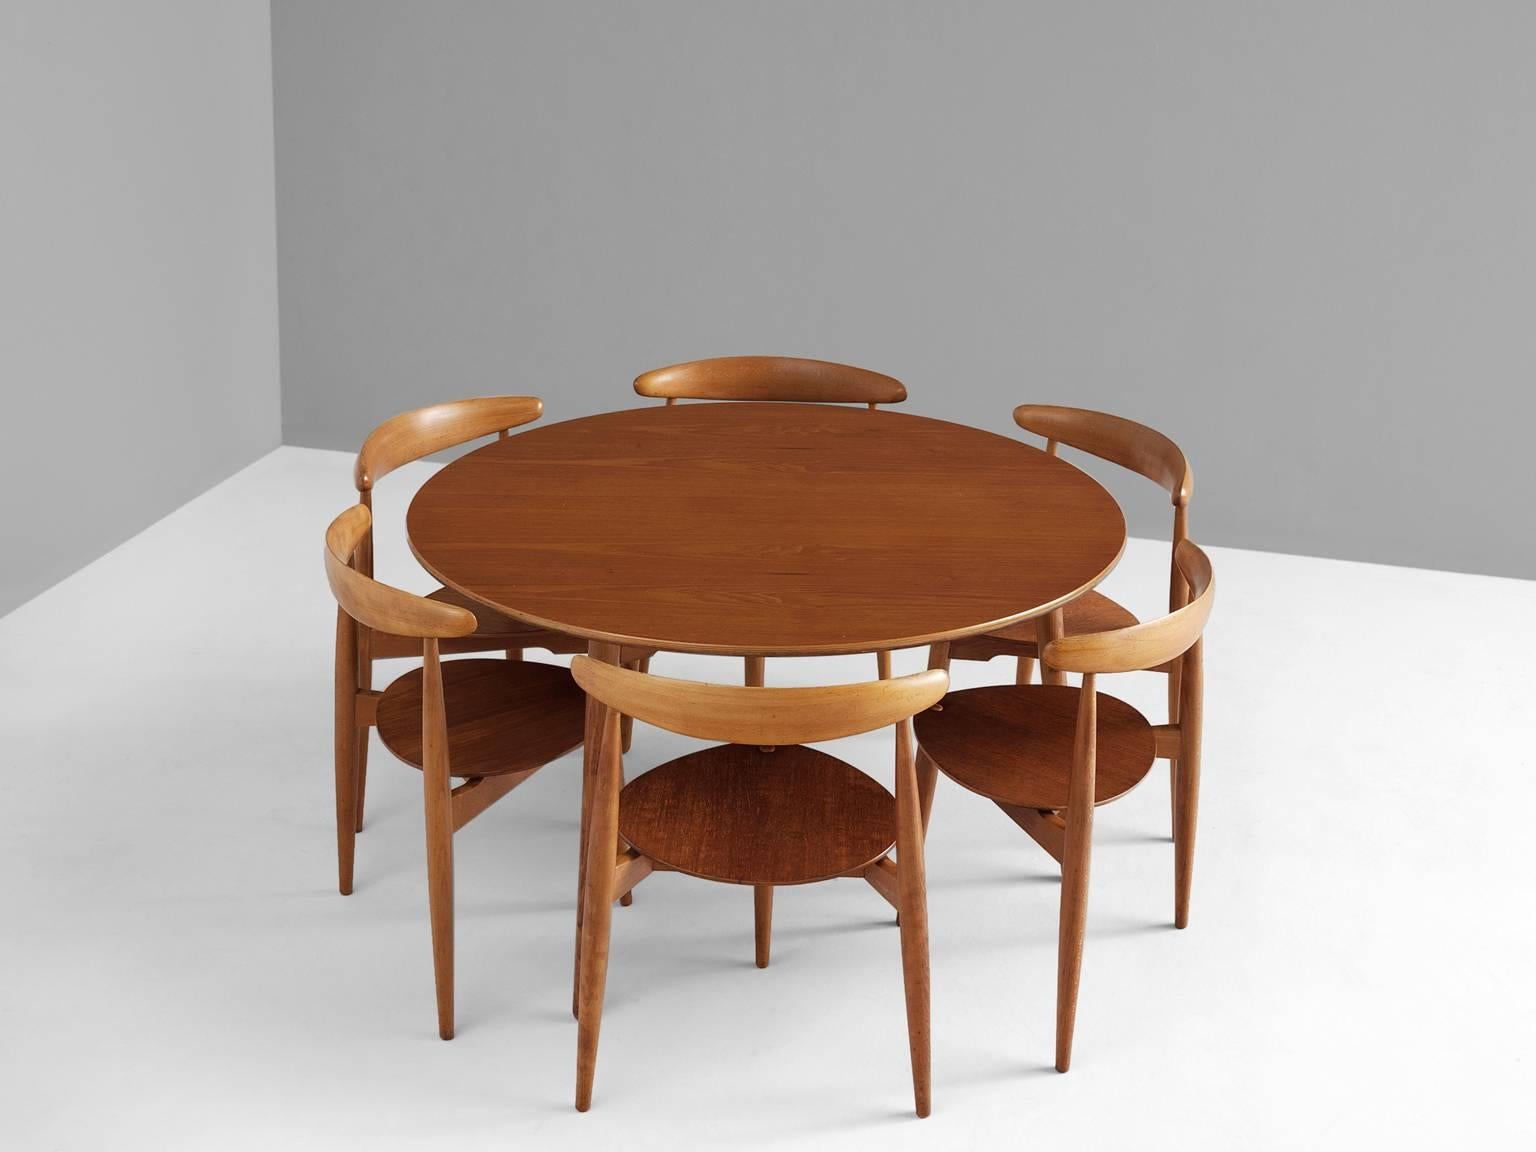 'Heart' set in beech and teak by Hans Wegner for Fritz Hansen, Denmark, 1950s.

Nowadays it is very rare to become this set as complete and in this condition, even in the combination of an oak frame accompanied by a teak veneer top.

Round table